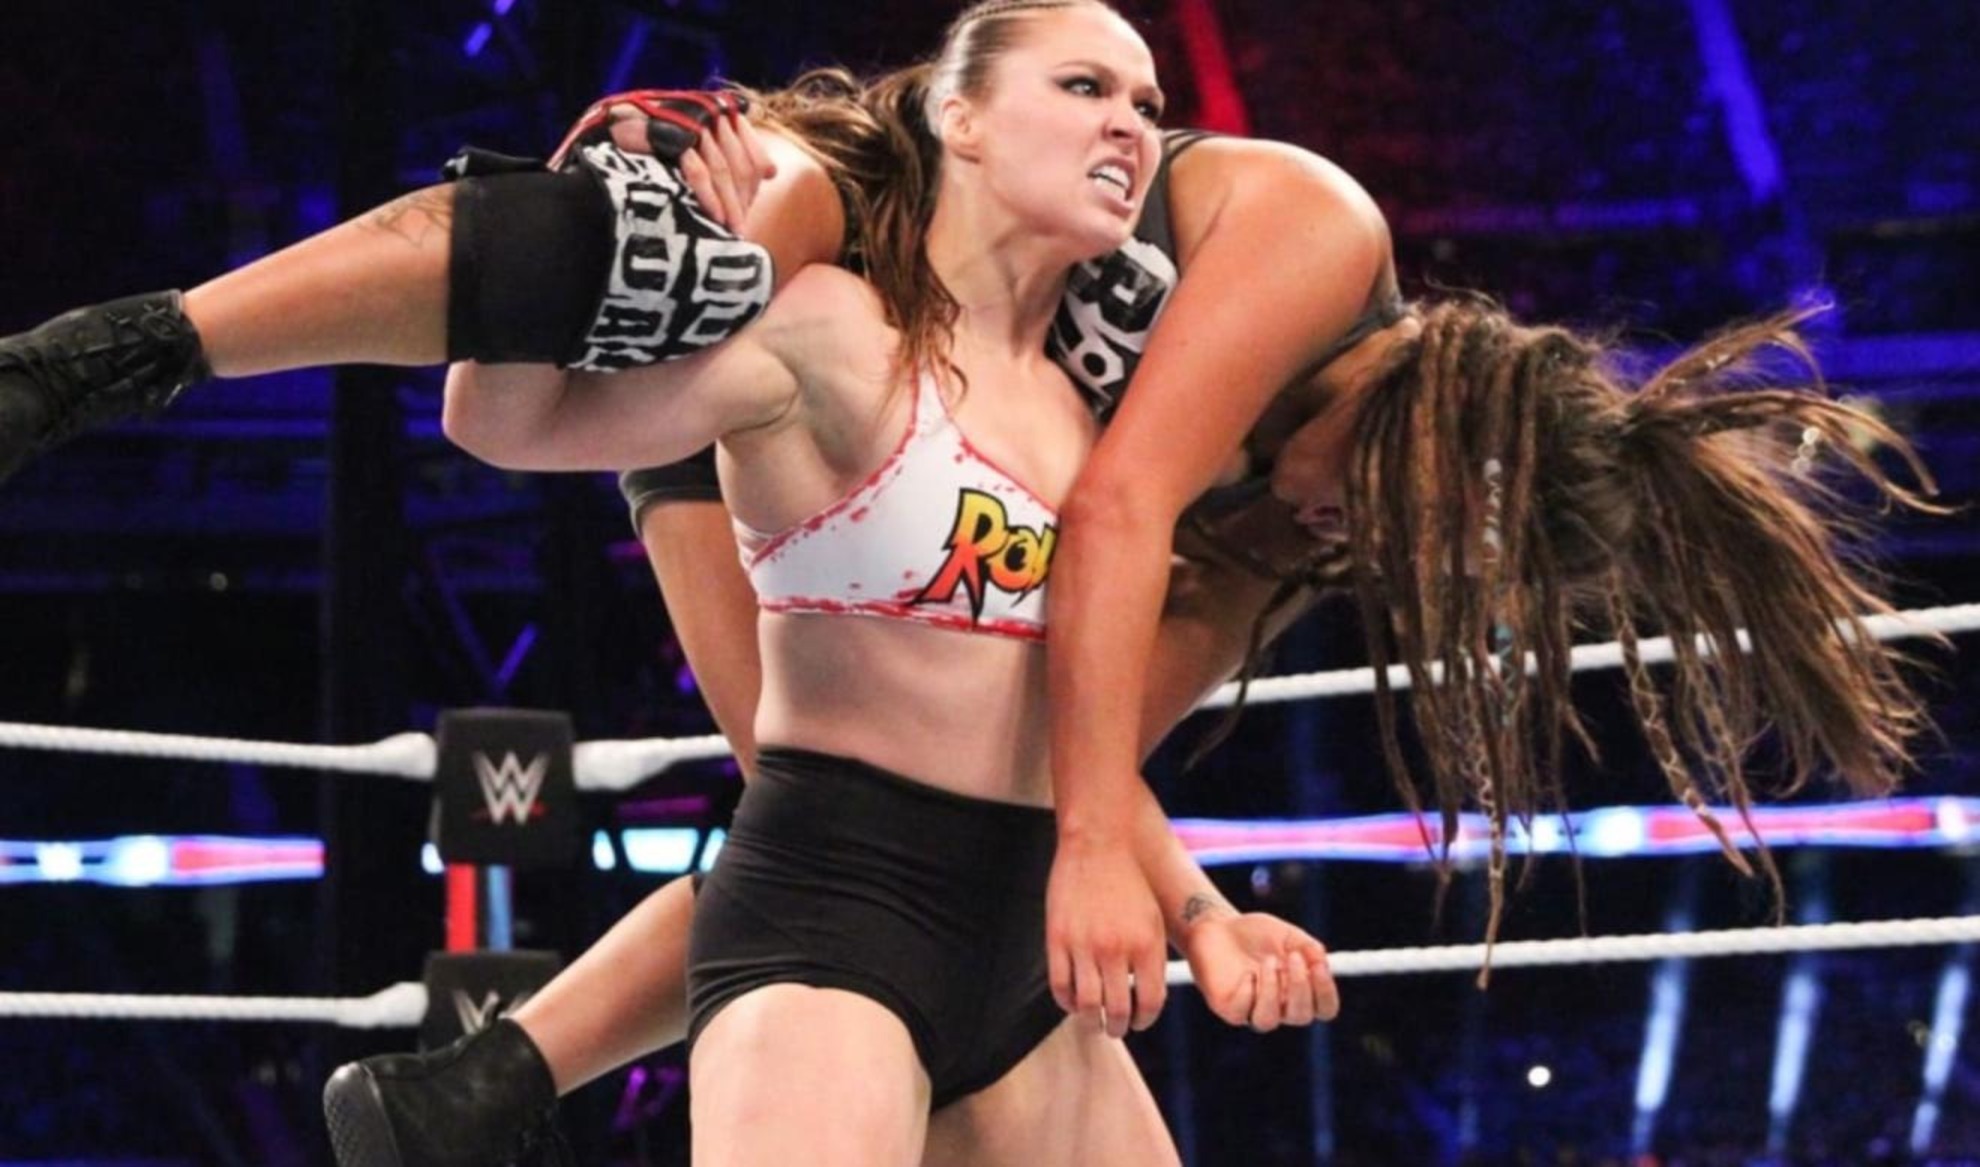 Ronda Rousey during one of her matches